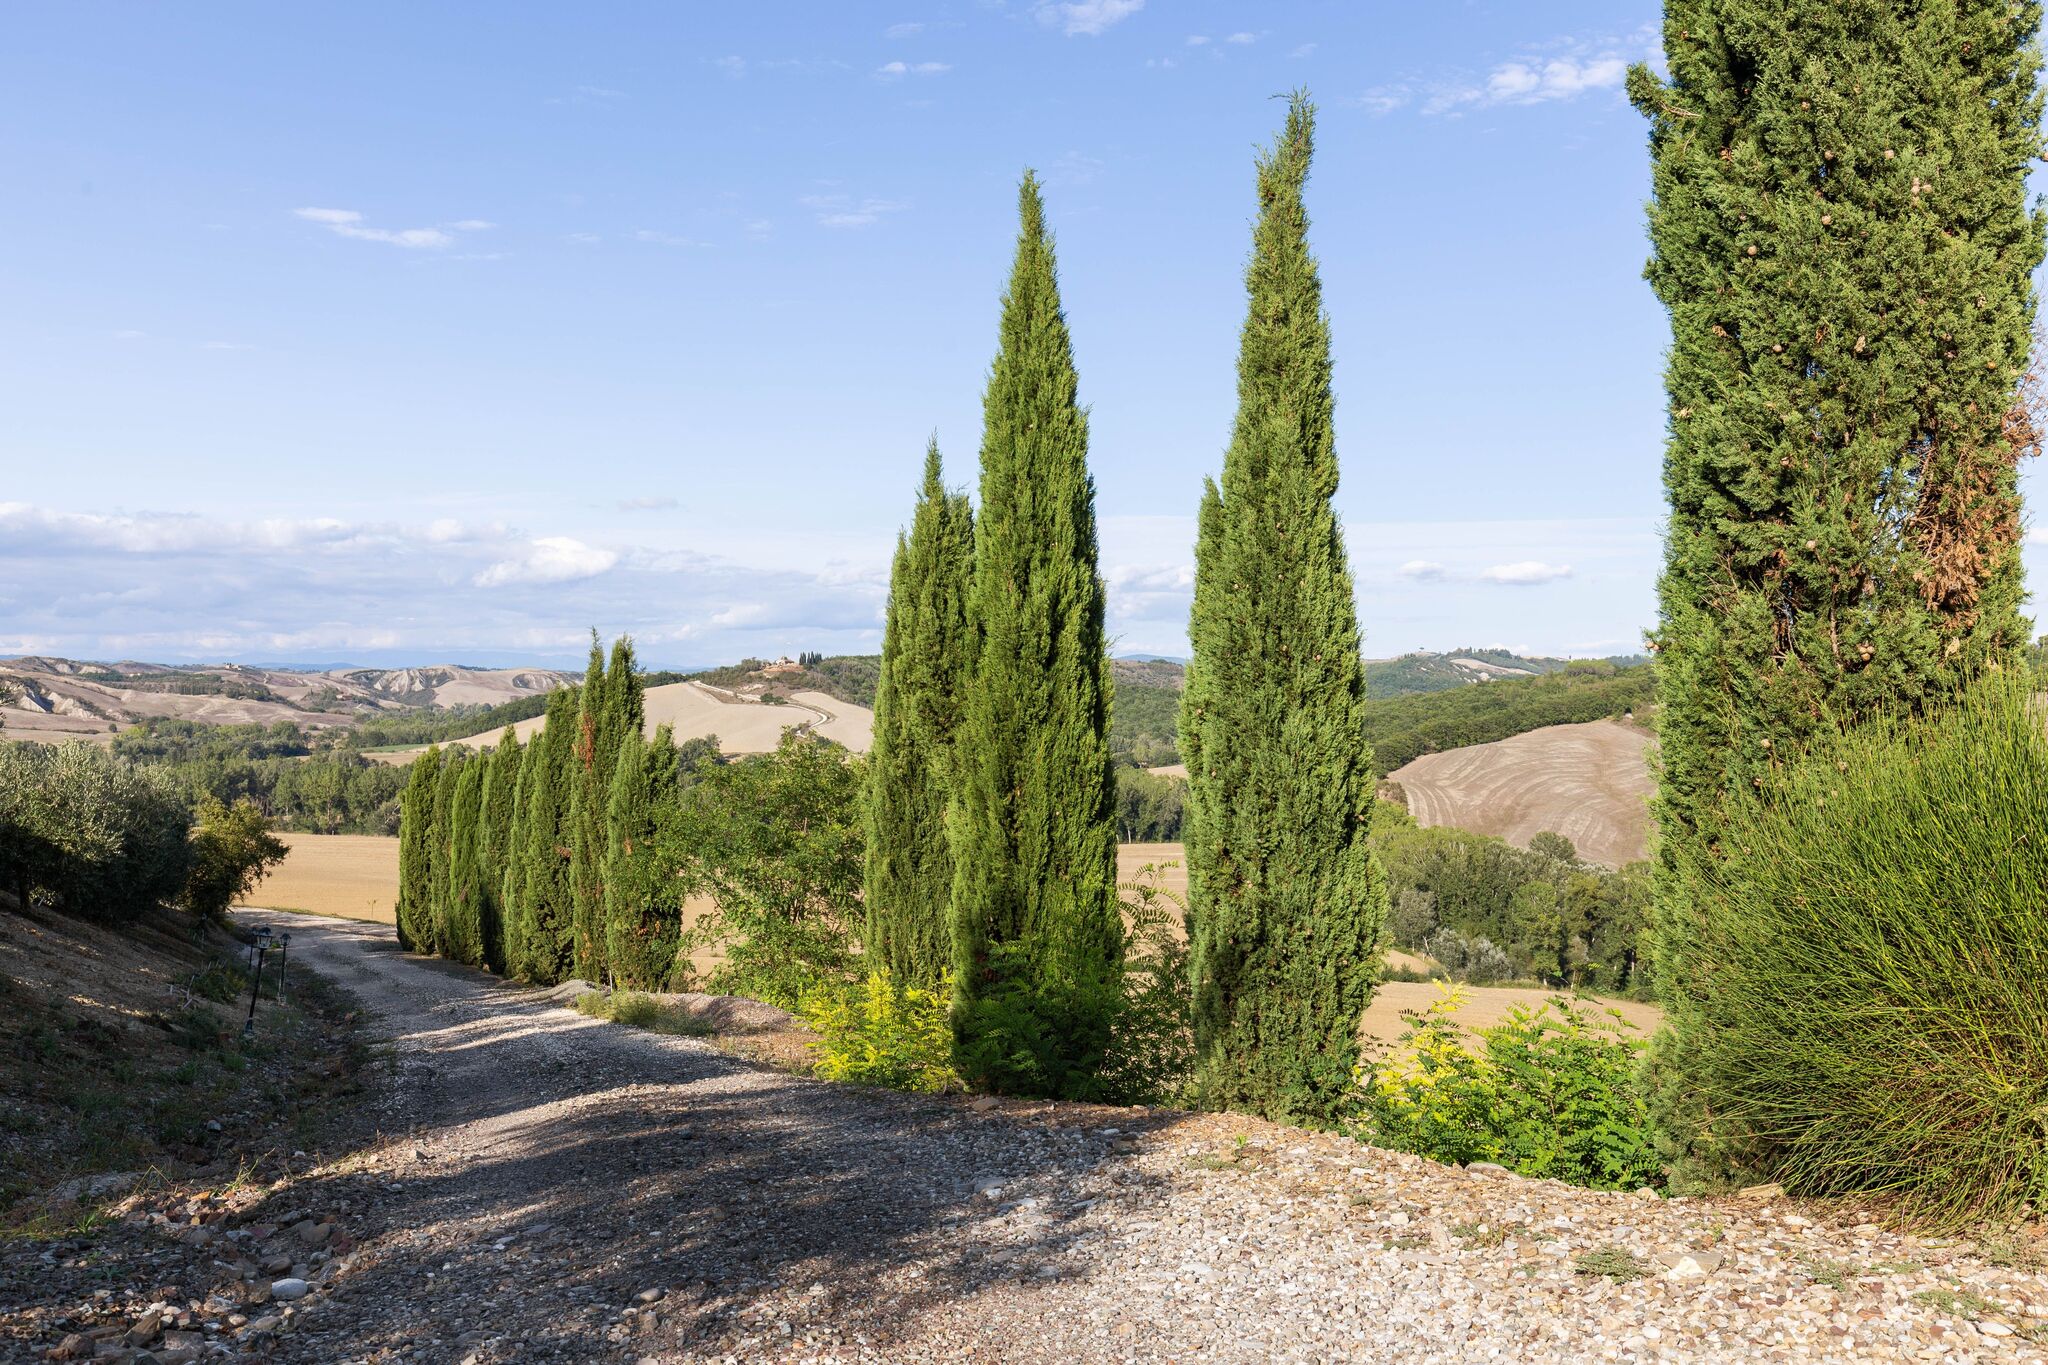 360 degree view over the Tuscan hills.